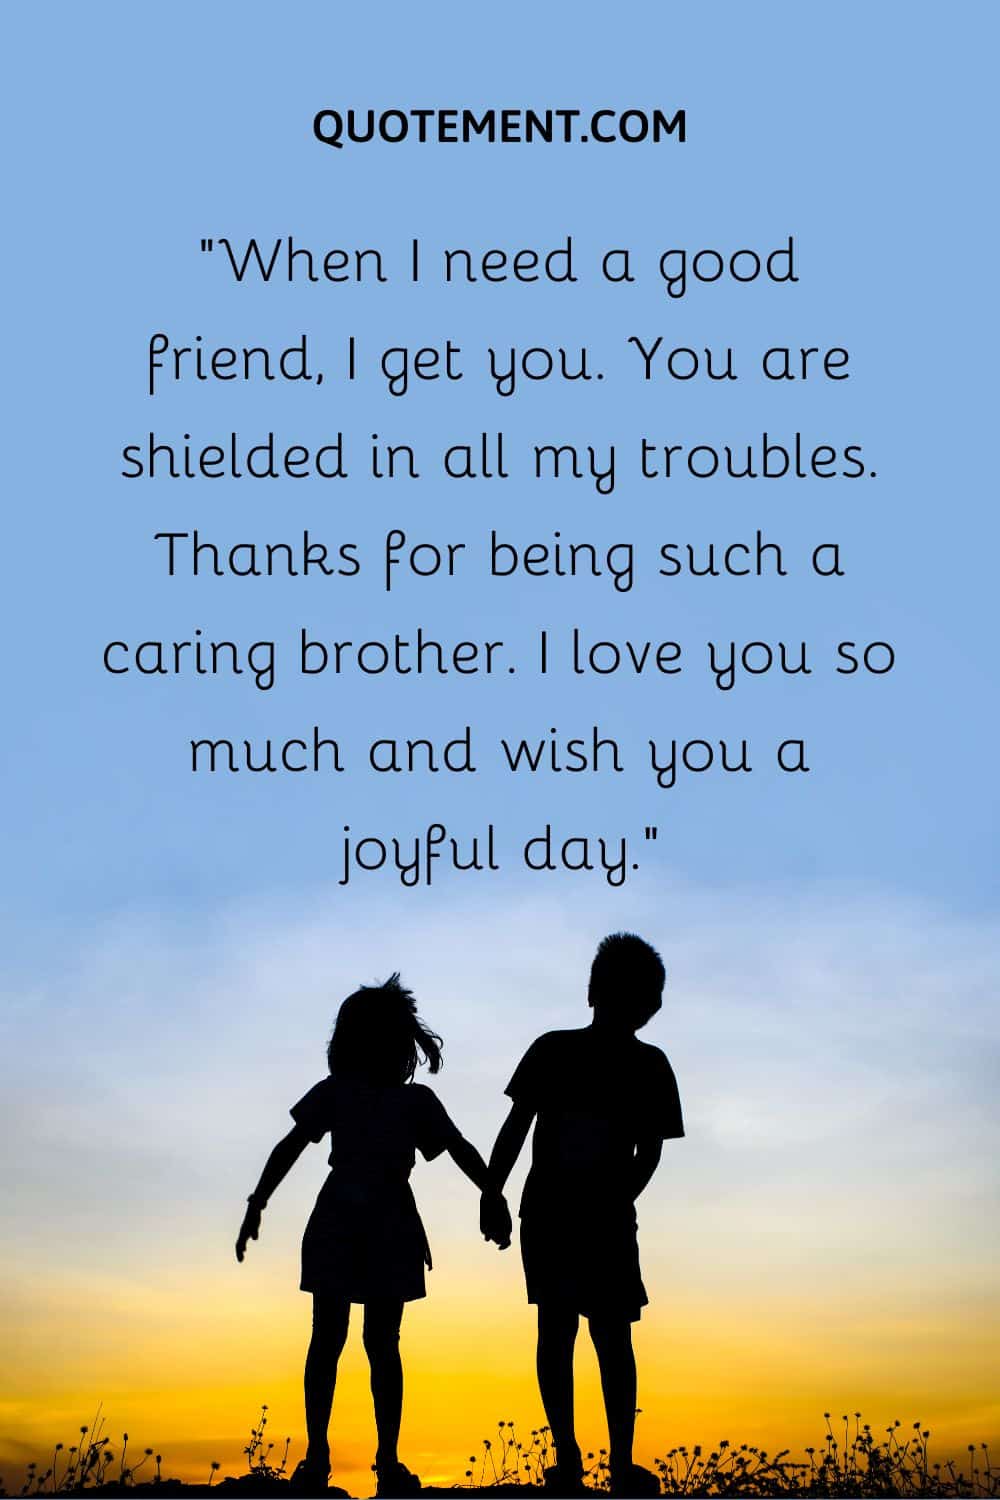 “When I need a good friend, I get you. You are shielded in all my troubles. Thanks for being such a caring brother. I love you so much and wish you a joyful day.”